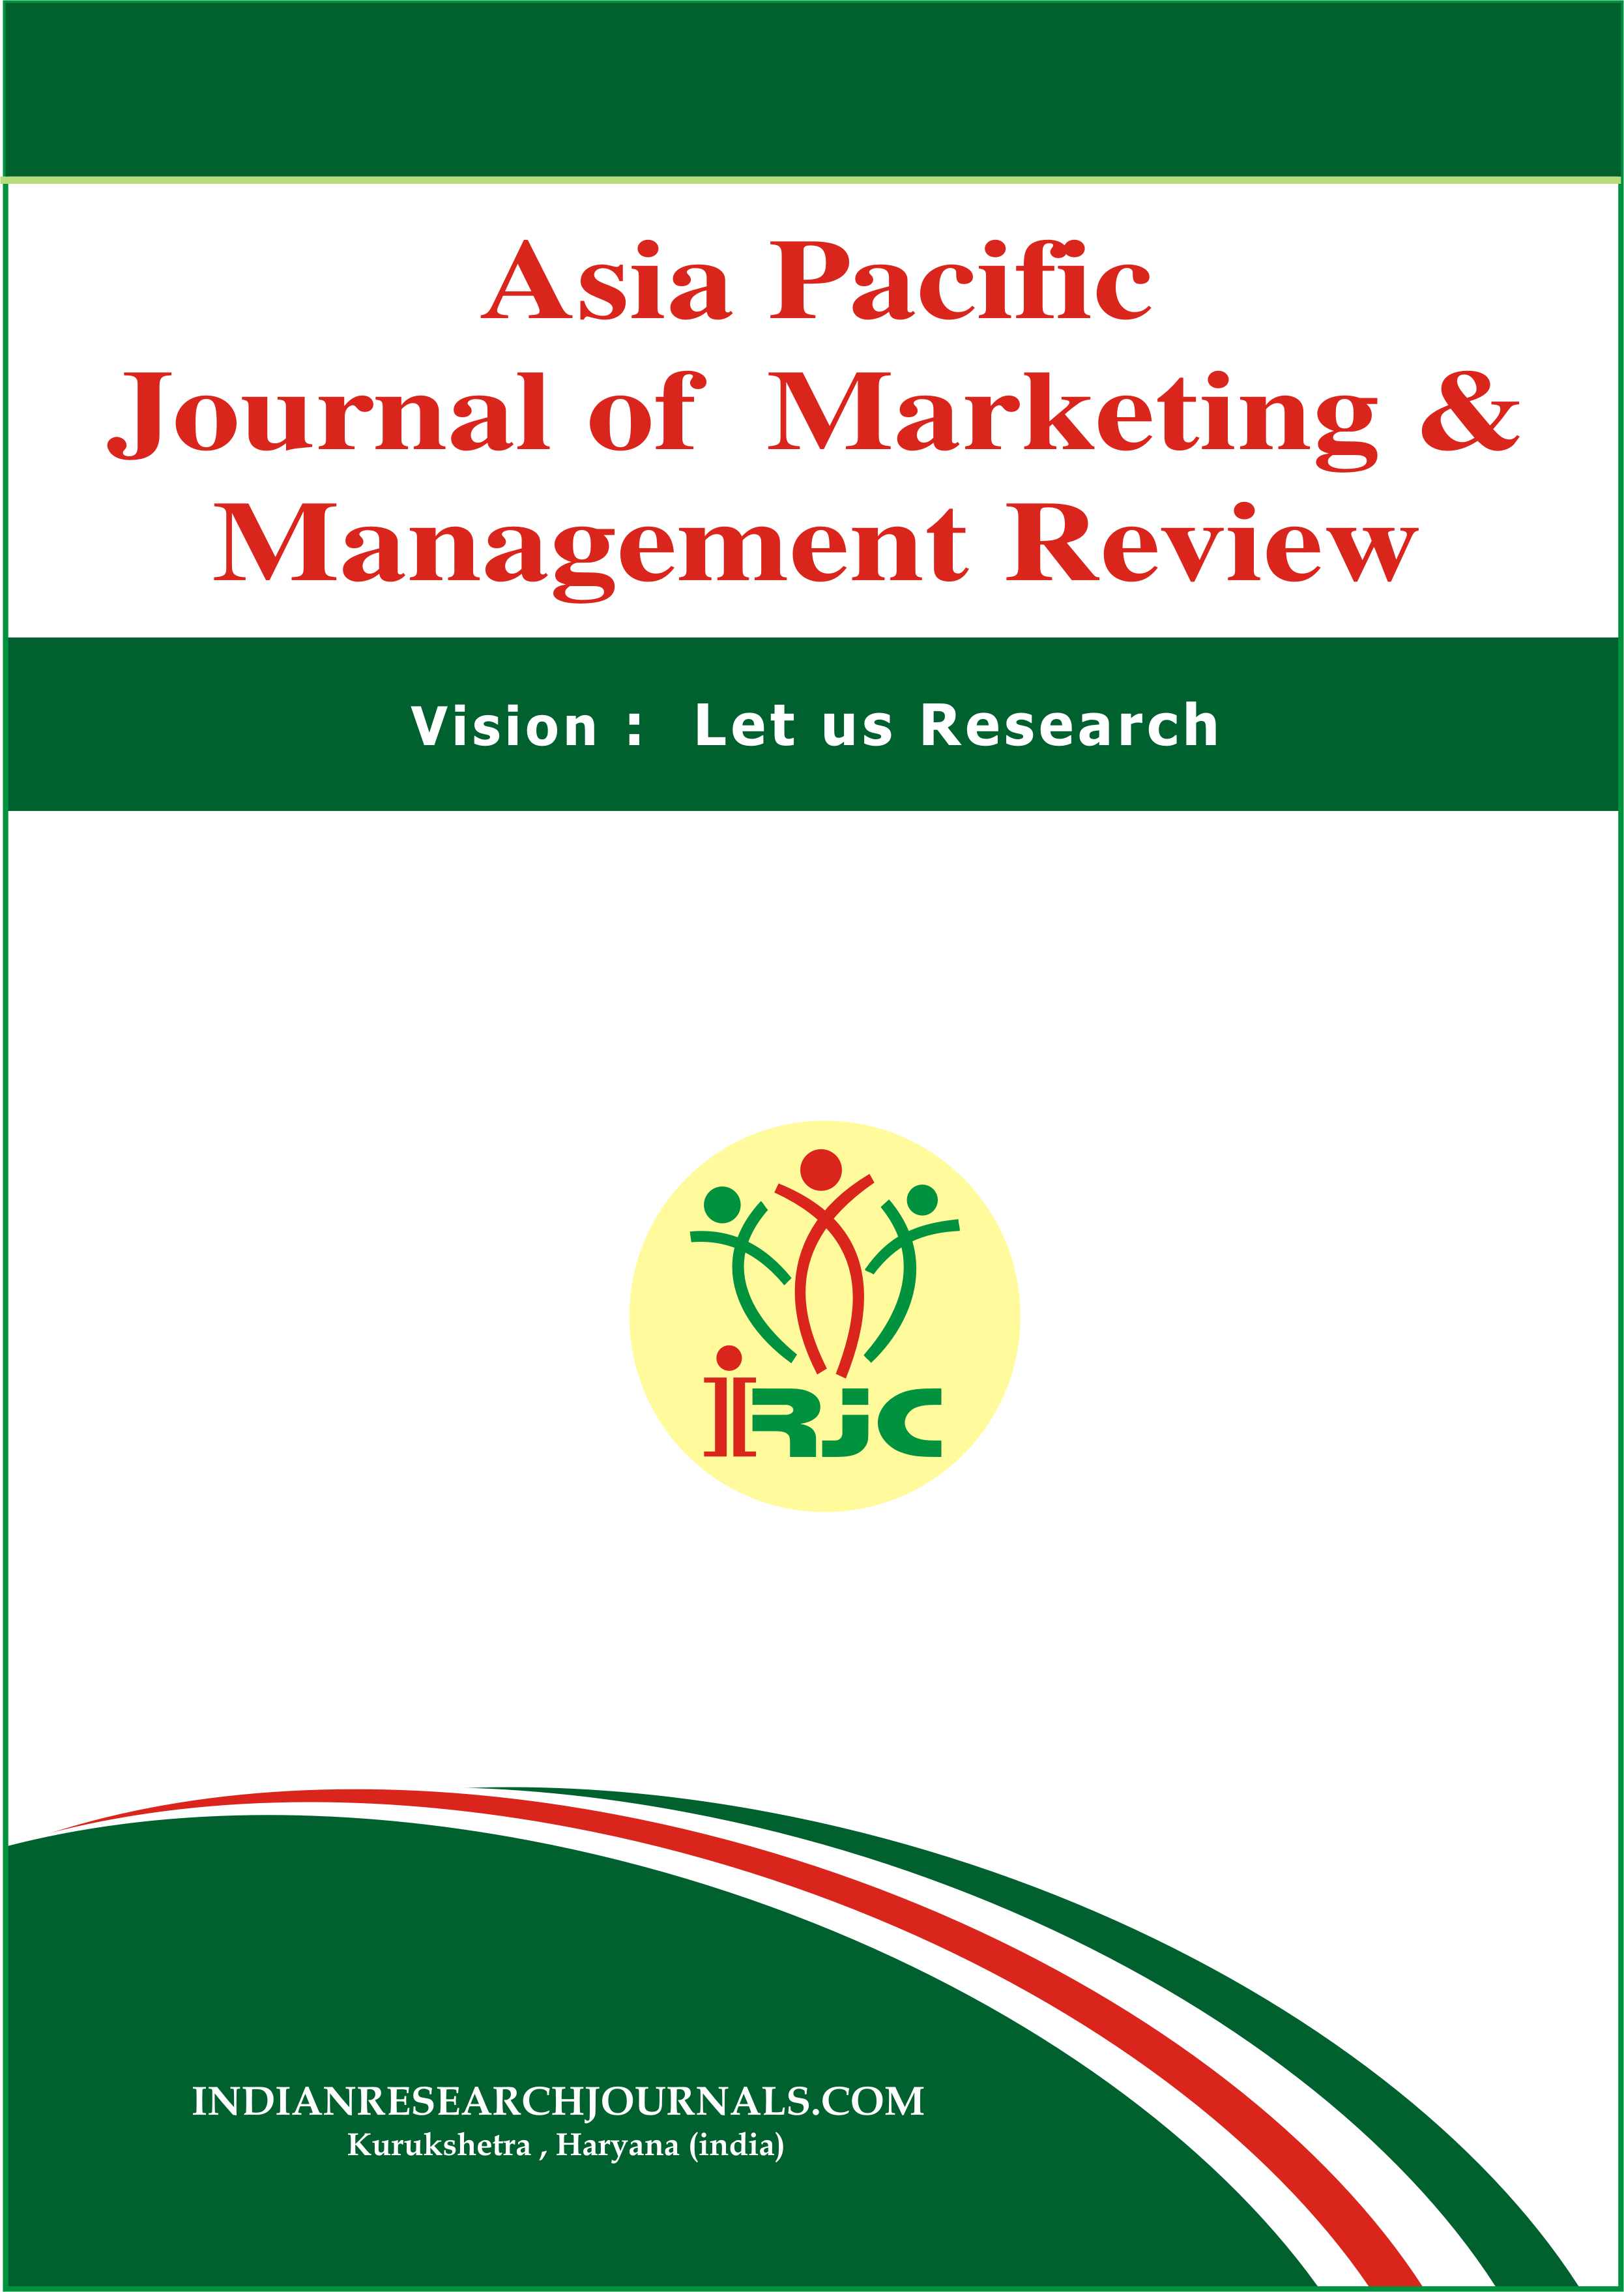 					View Vol. 12 No. 09 (2023): ASIA PACIFIC JOURNAL OF MARKETING & MANAGEMENT REVIEW
				